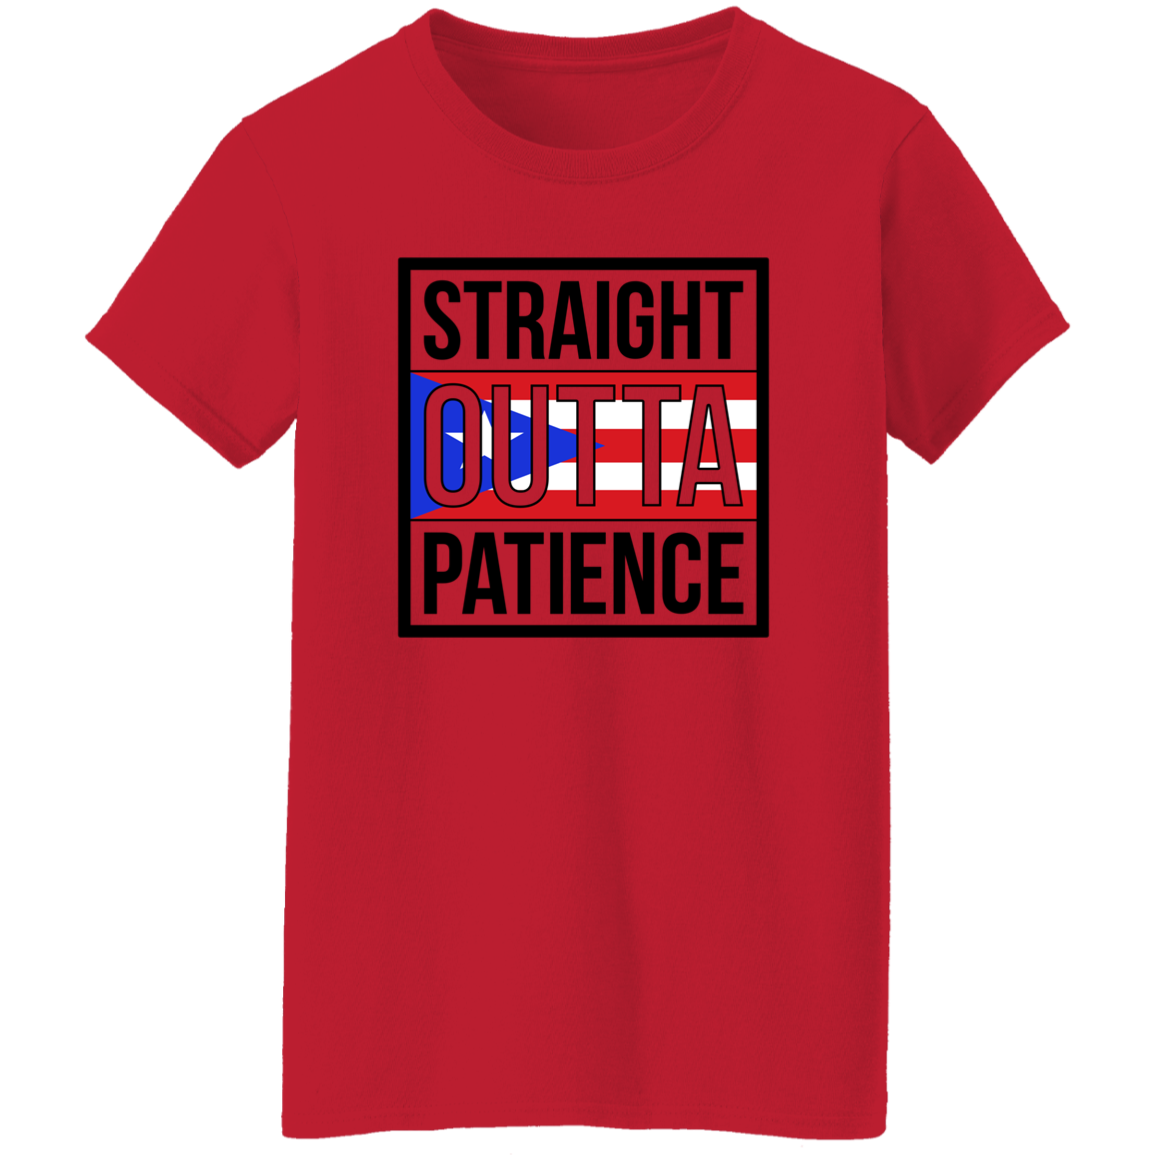 Straight Outta Patience - Ladies' 5.3 oz. T-Shirt